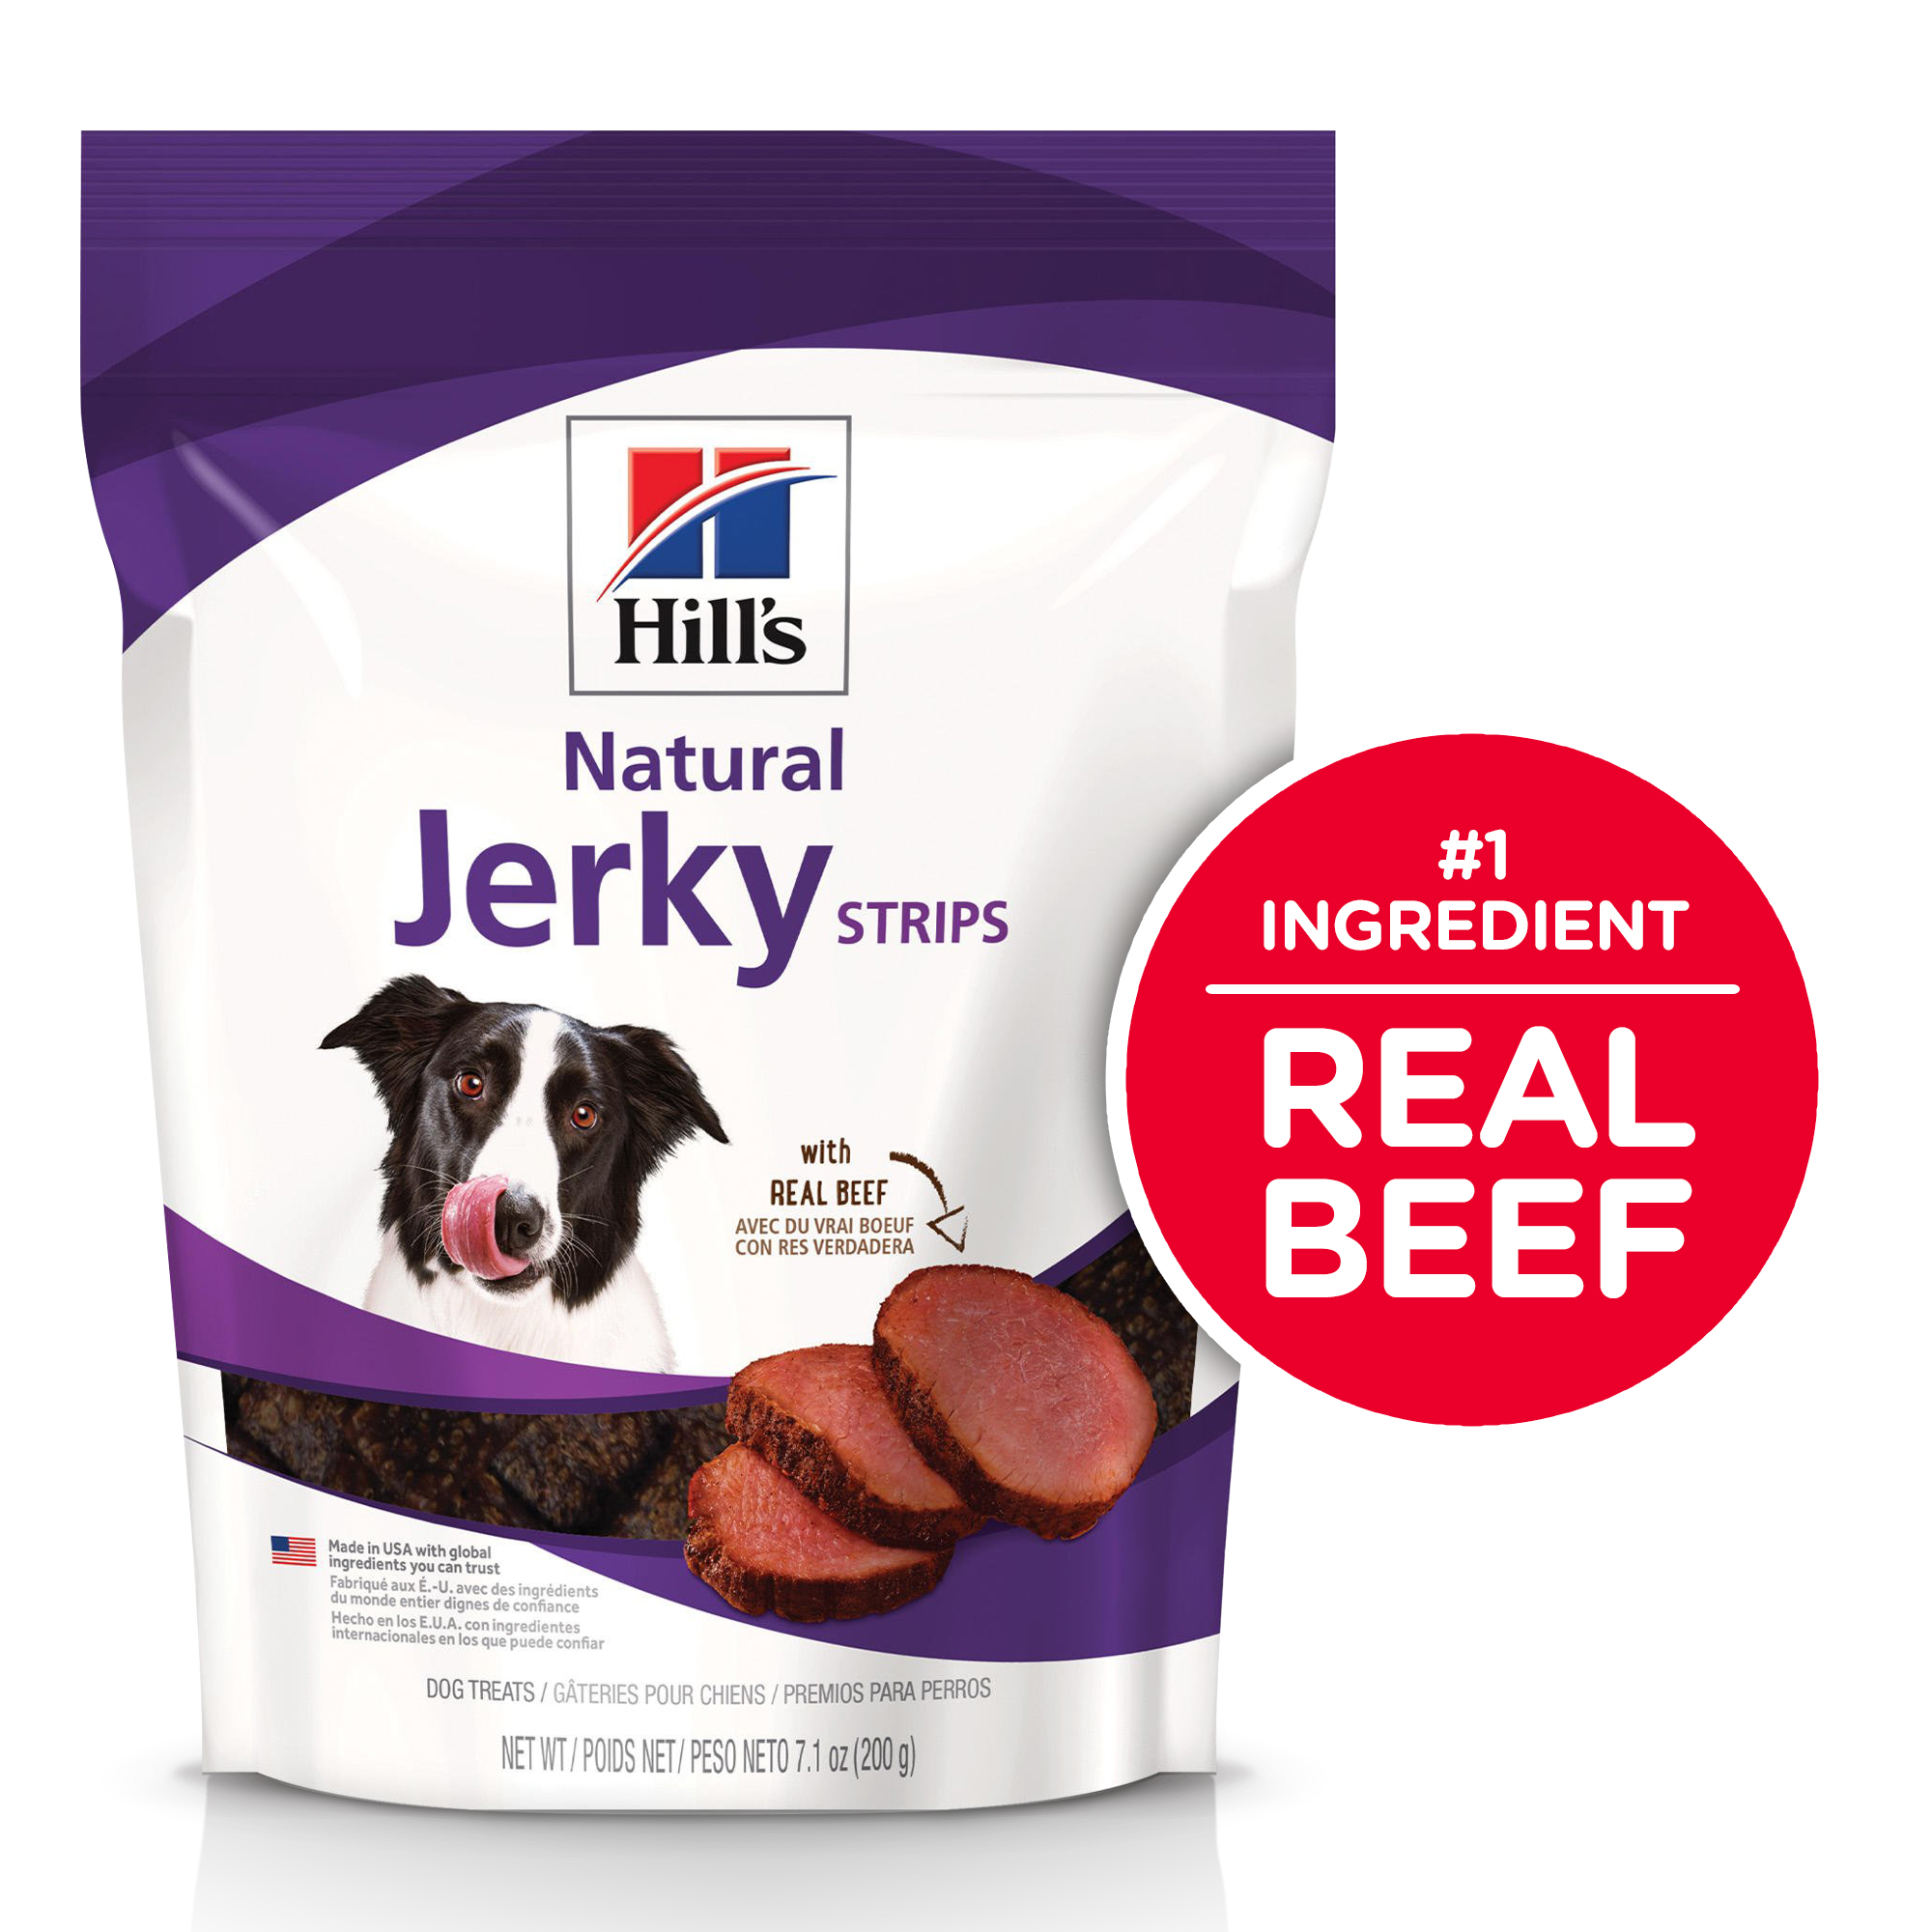 Hill's Natural Jerky Strips Dog Treats with Real Beef 7.1oz